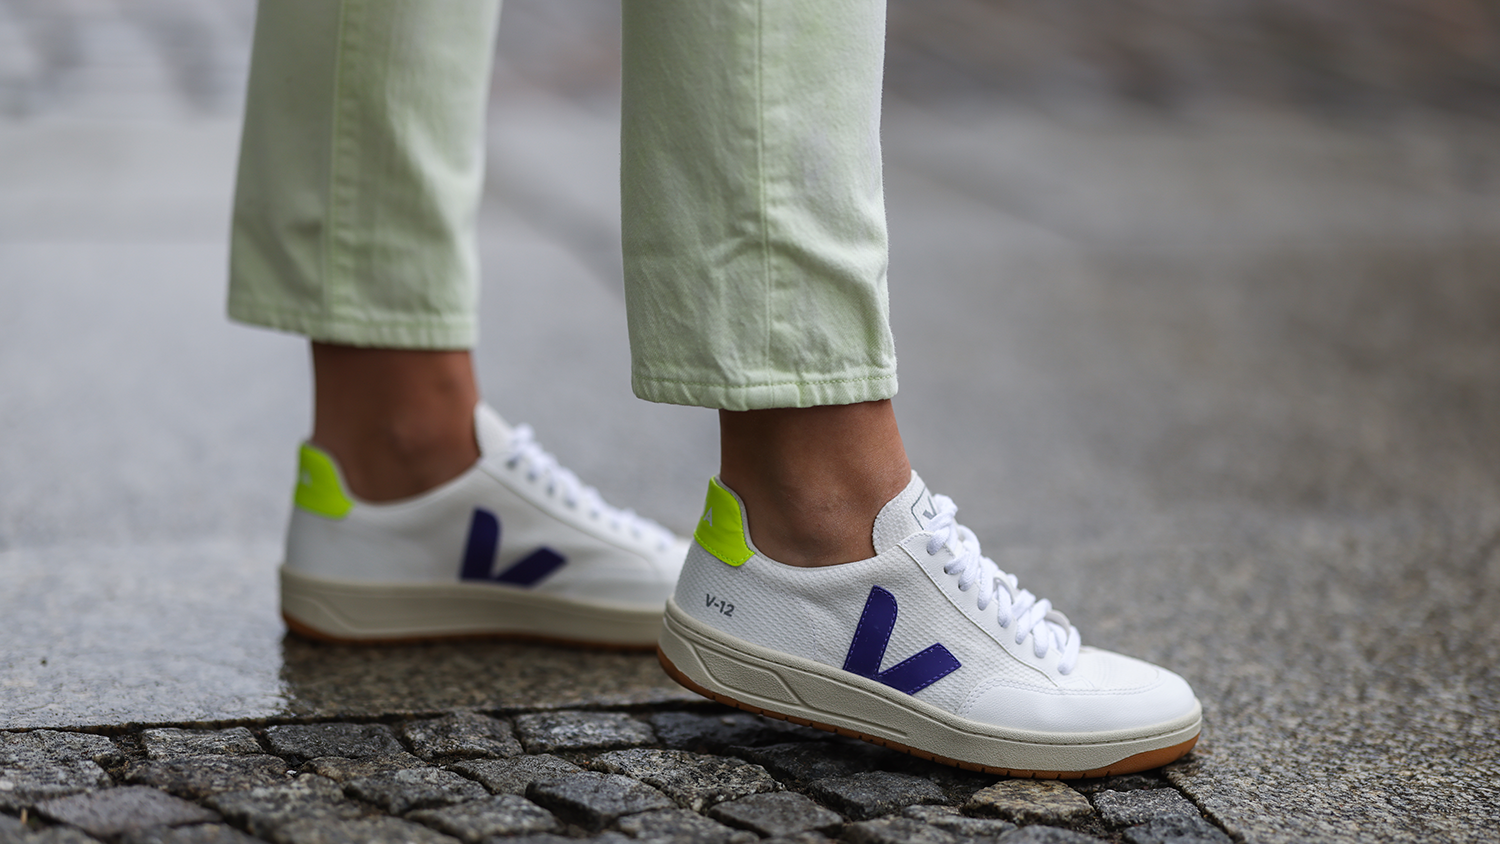 Veja - are they the Editor review